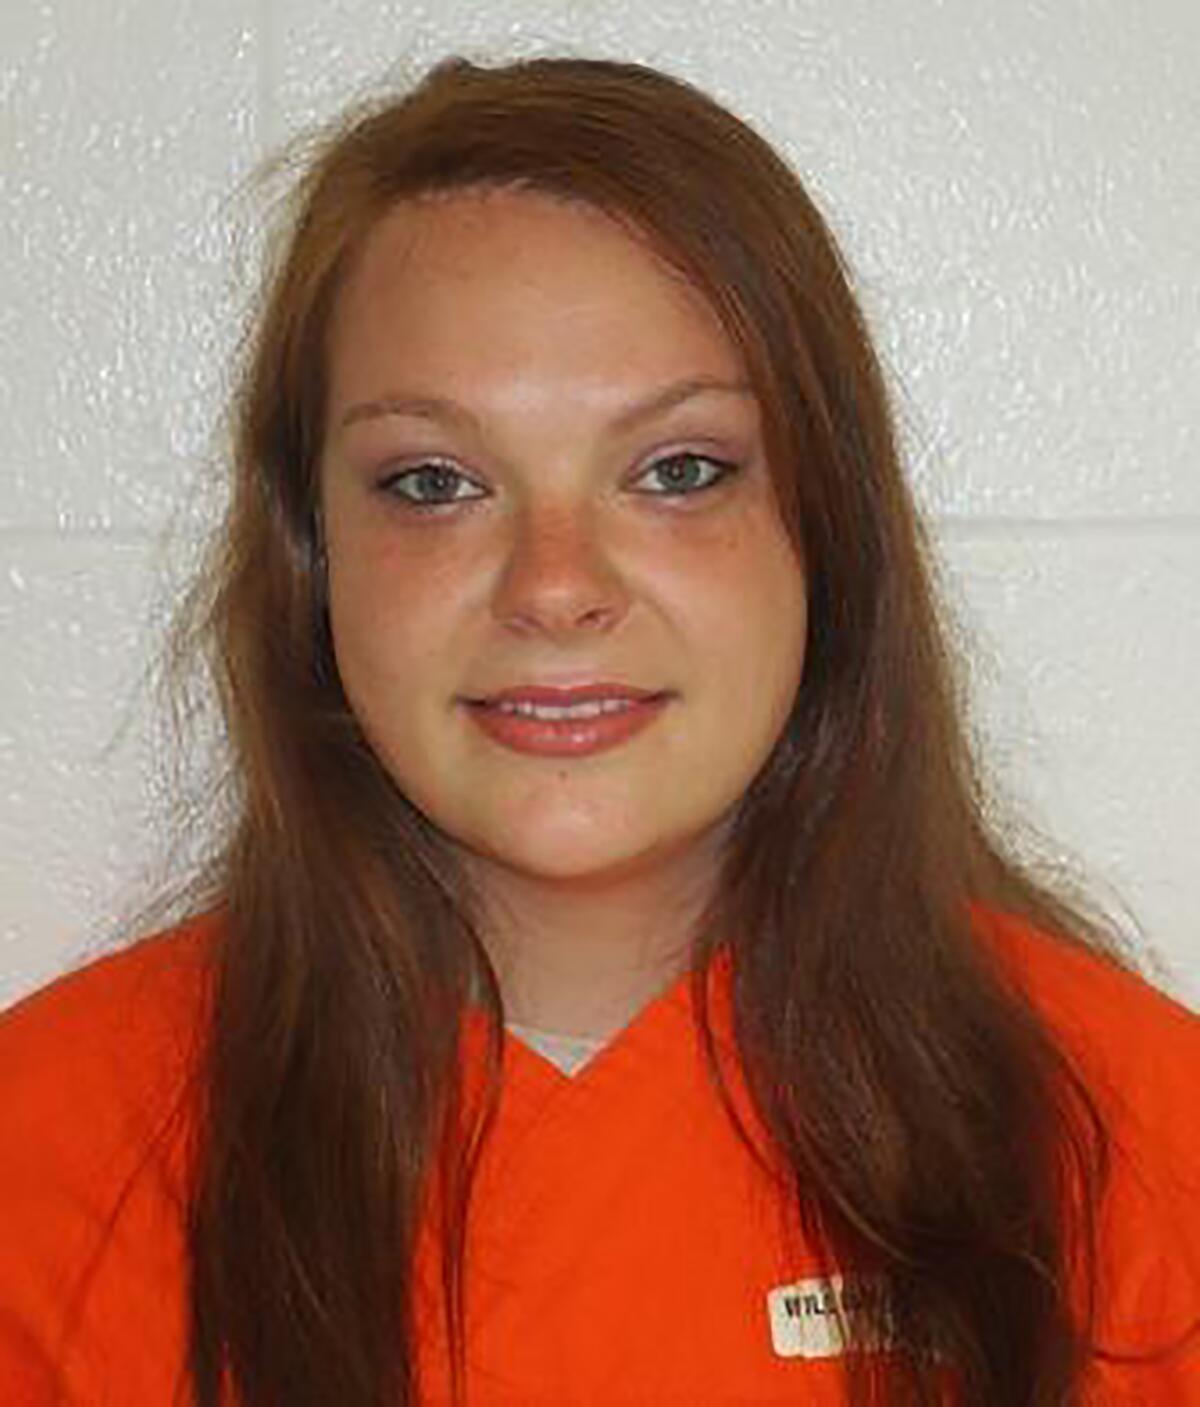 This June 18, 2019 photo provided by the Oklahoma Department of Corrections shows Brooklyn Williams. The Oklahoma Court of Criminal Appeals has upheld the second-degree murder conviction and 25-year prison sentence of Williams on Sept. 2, 2021, in connection with the fatal shooting of a police officer in 2017. (Oklahoma Department of Corrections via AP)